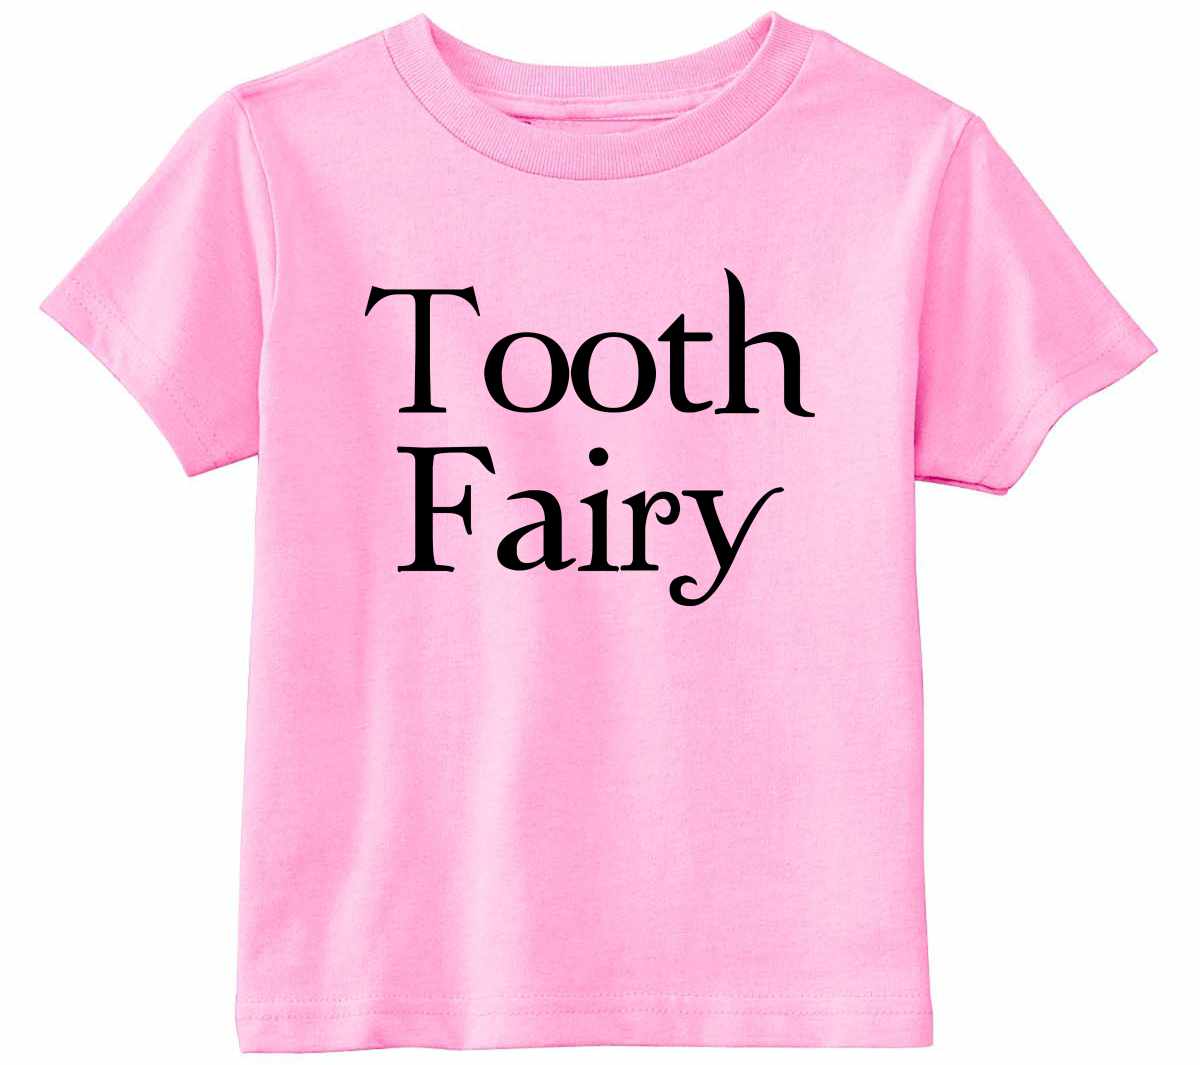 Tooth Fairy on Infant-Toddler T-Shirt (#680-7)